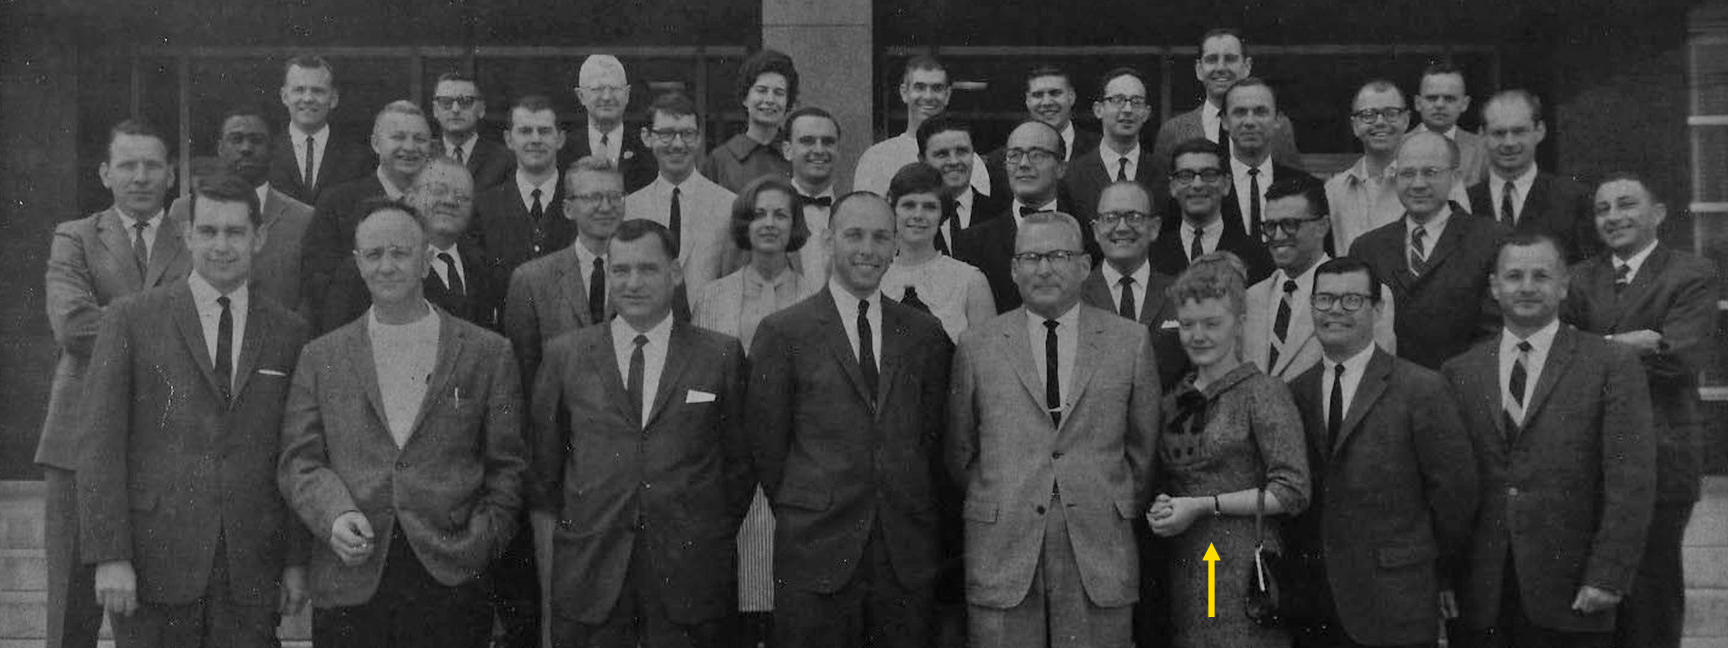 Dr. Helen F. Frevel pictured in a 1965 UCSF Anesthesia group faculty and trainees photo